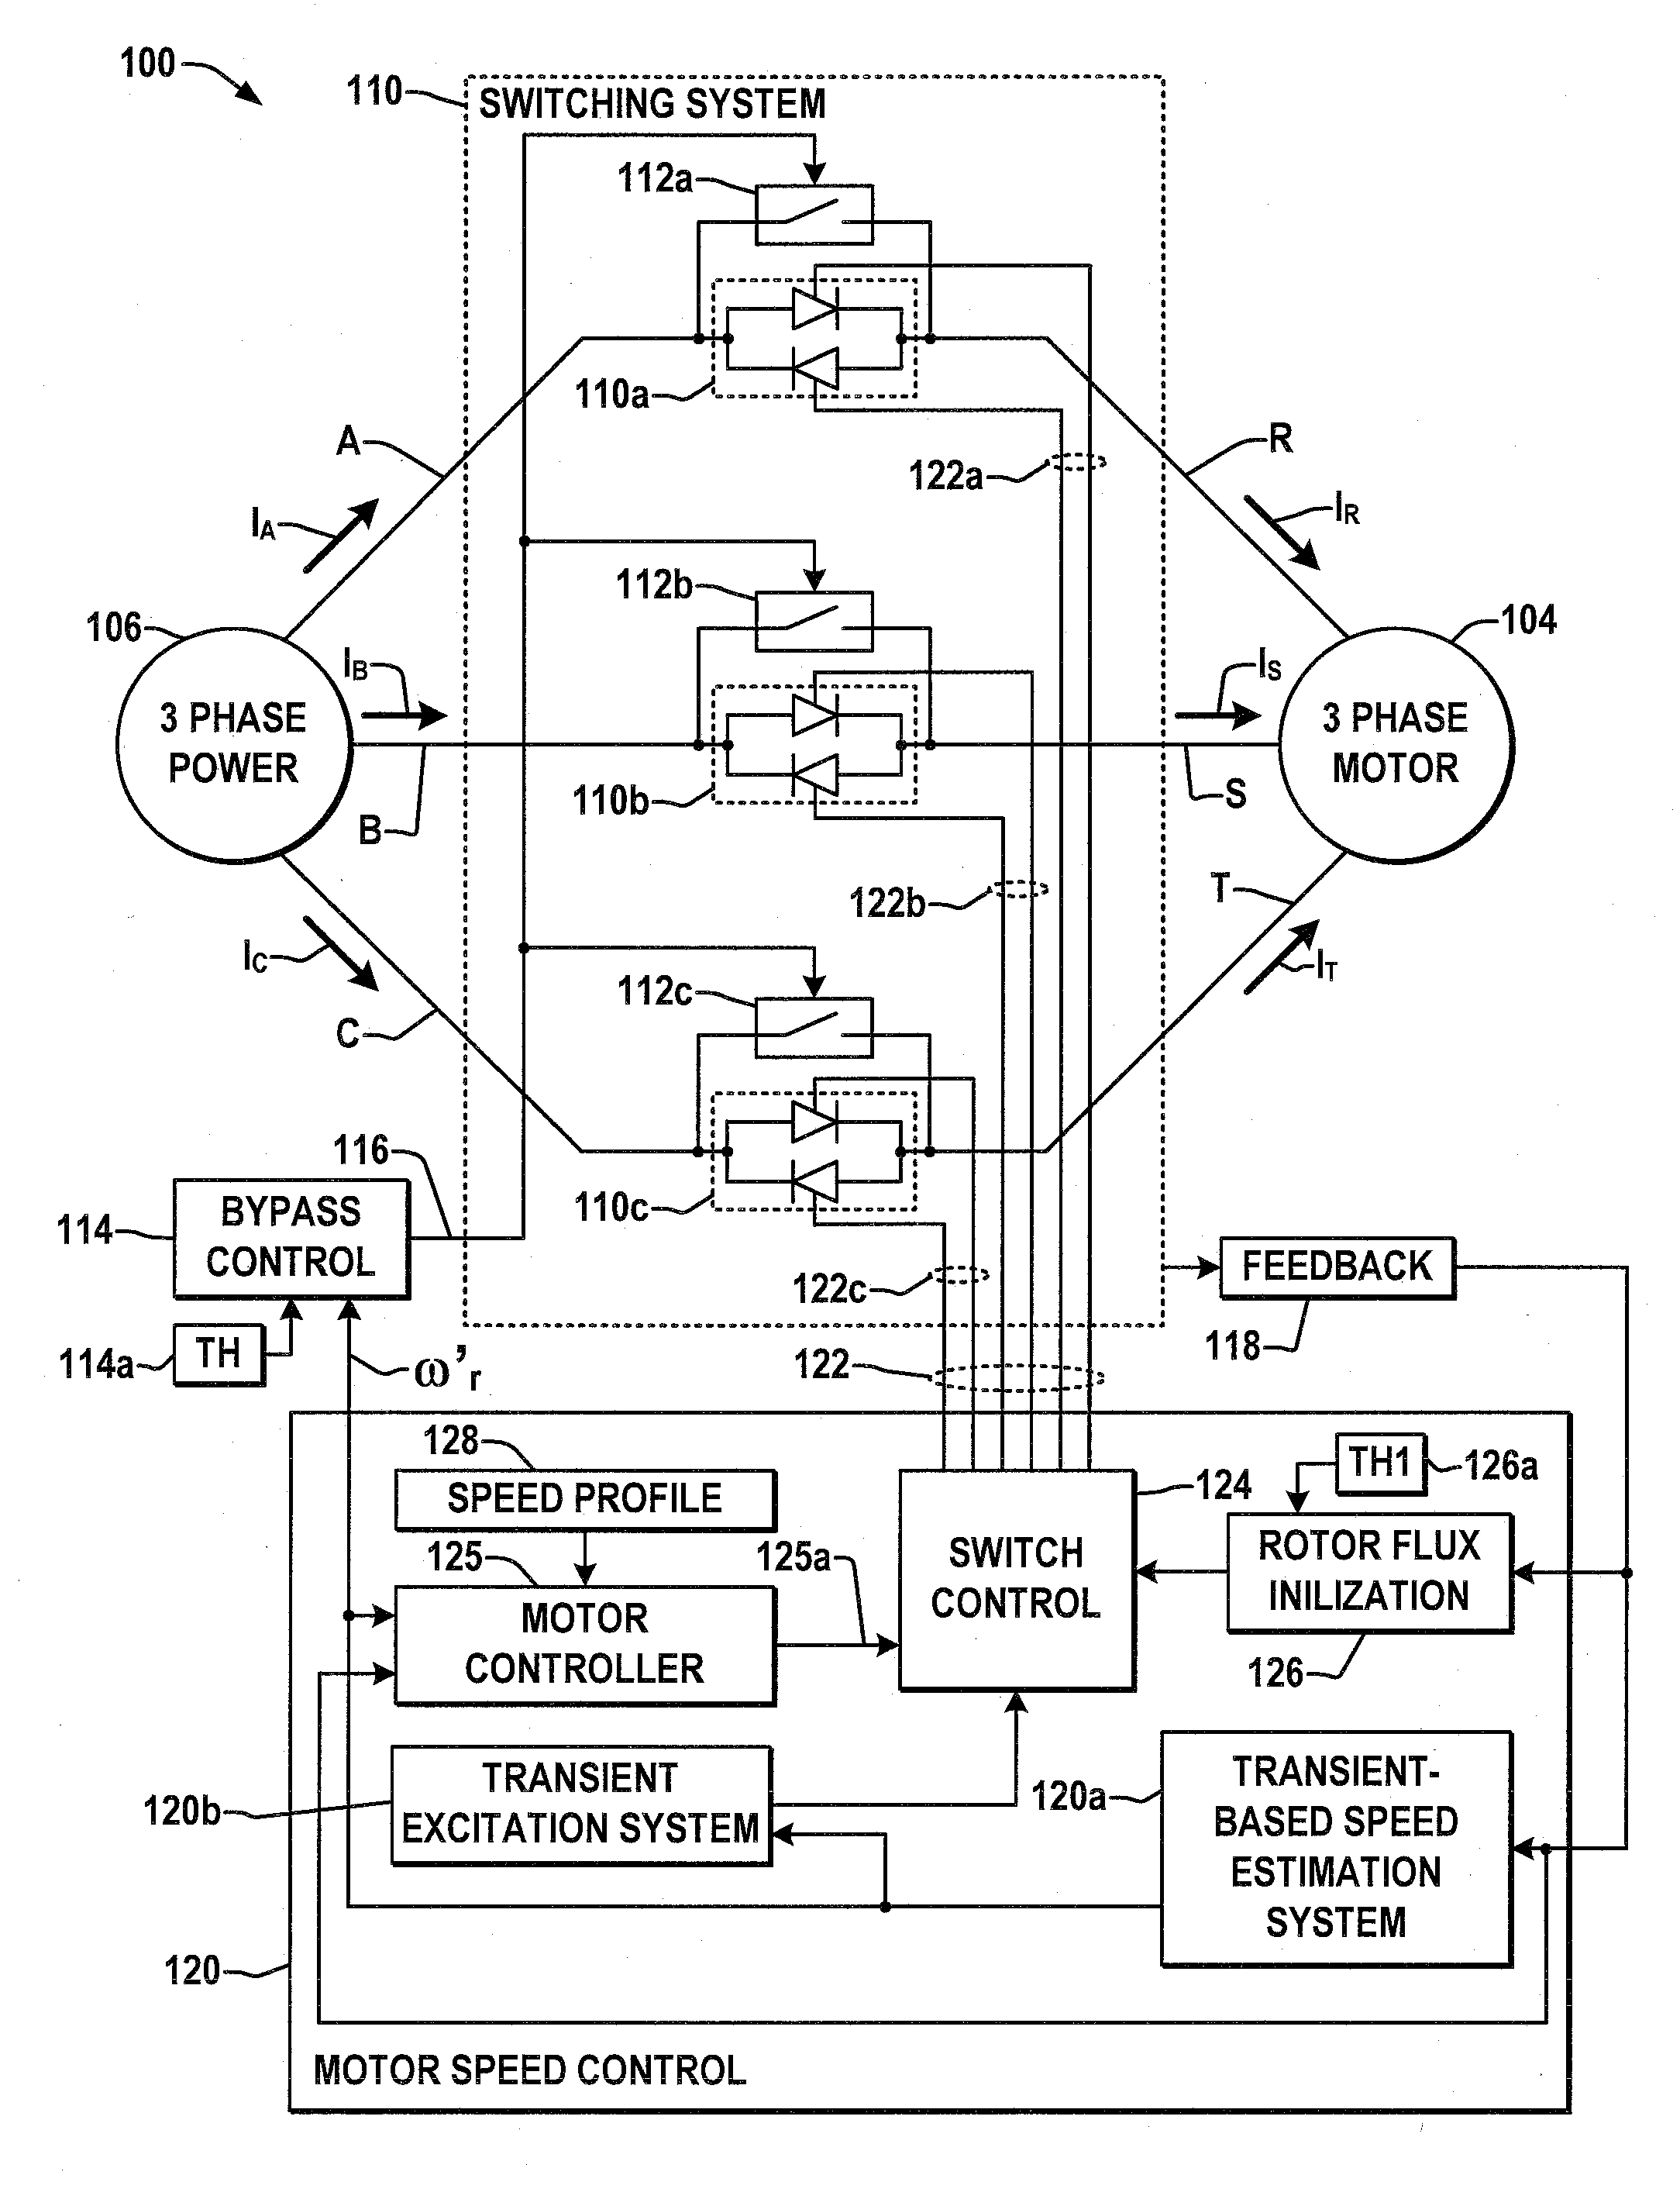 System and method for transient-based motor speed estimation with transient excitation